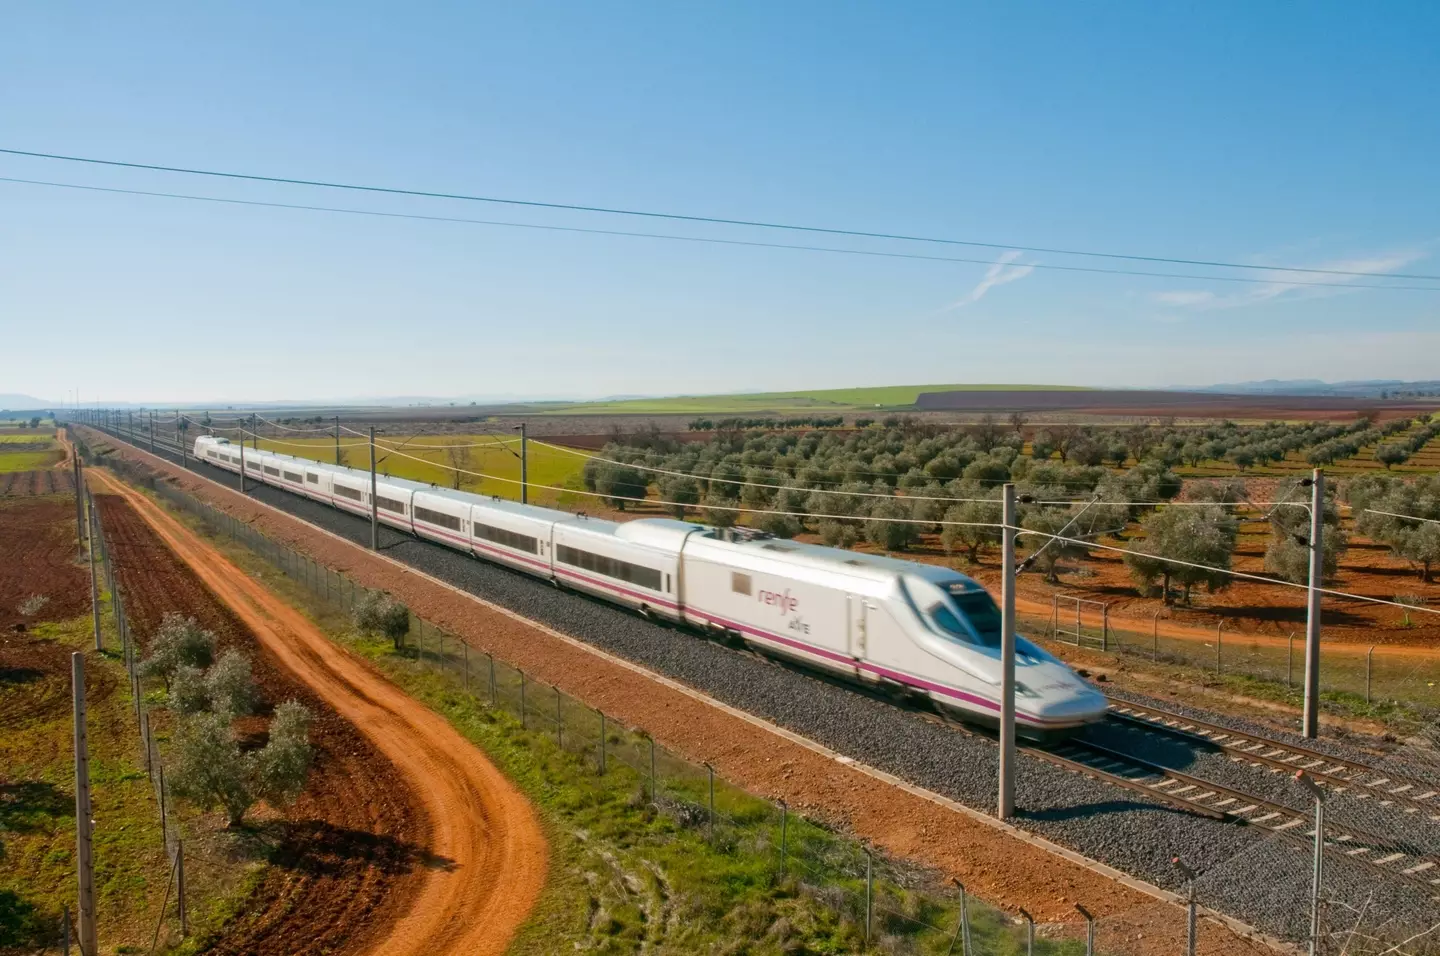 A train in Spain moving freely on the plain.